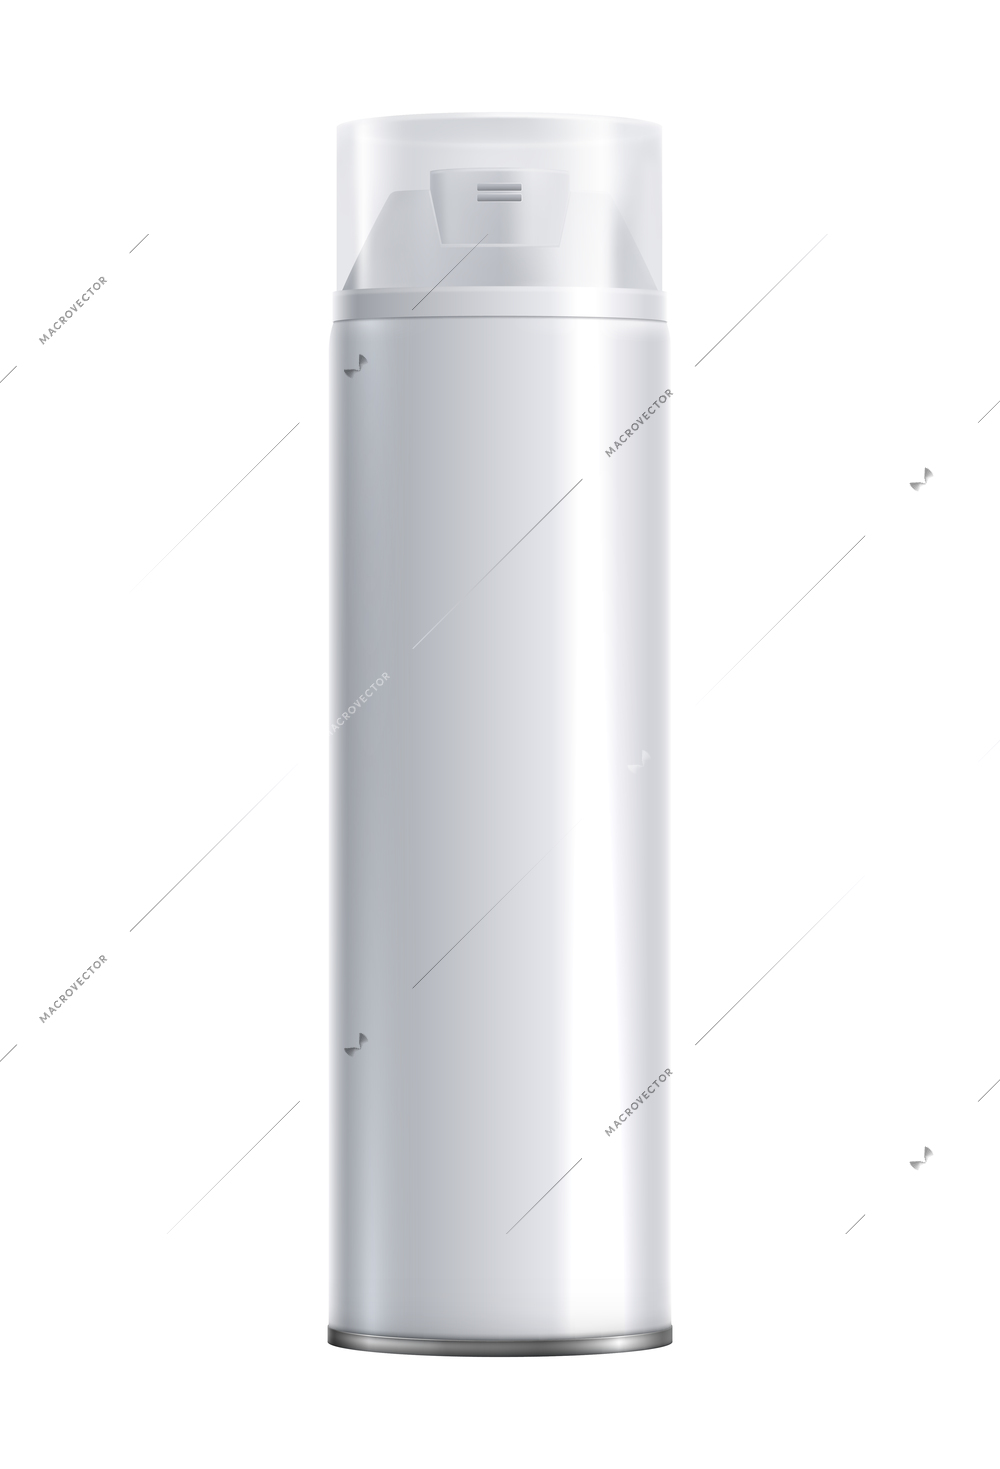 Blank shave foam packaging mockup on white background realistic vector illustration